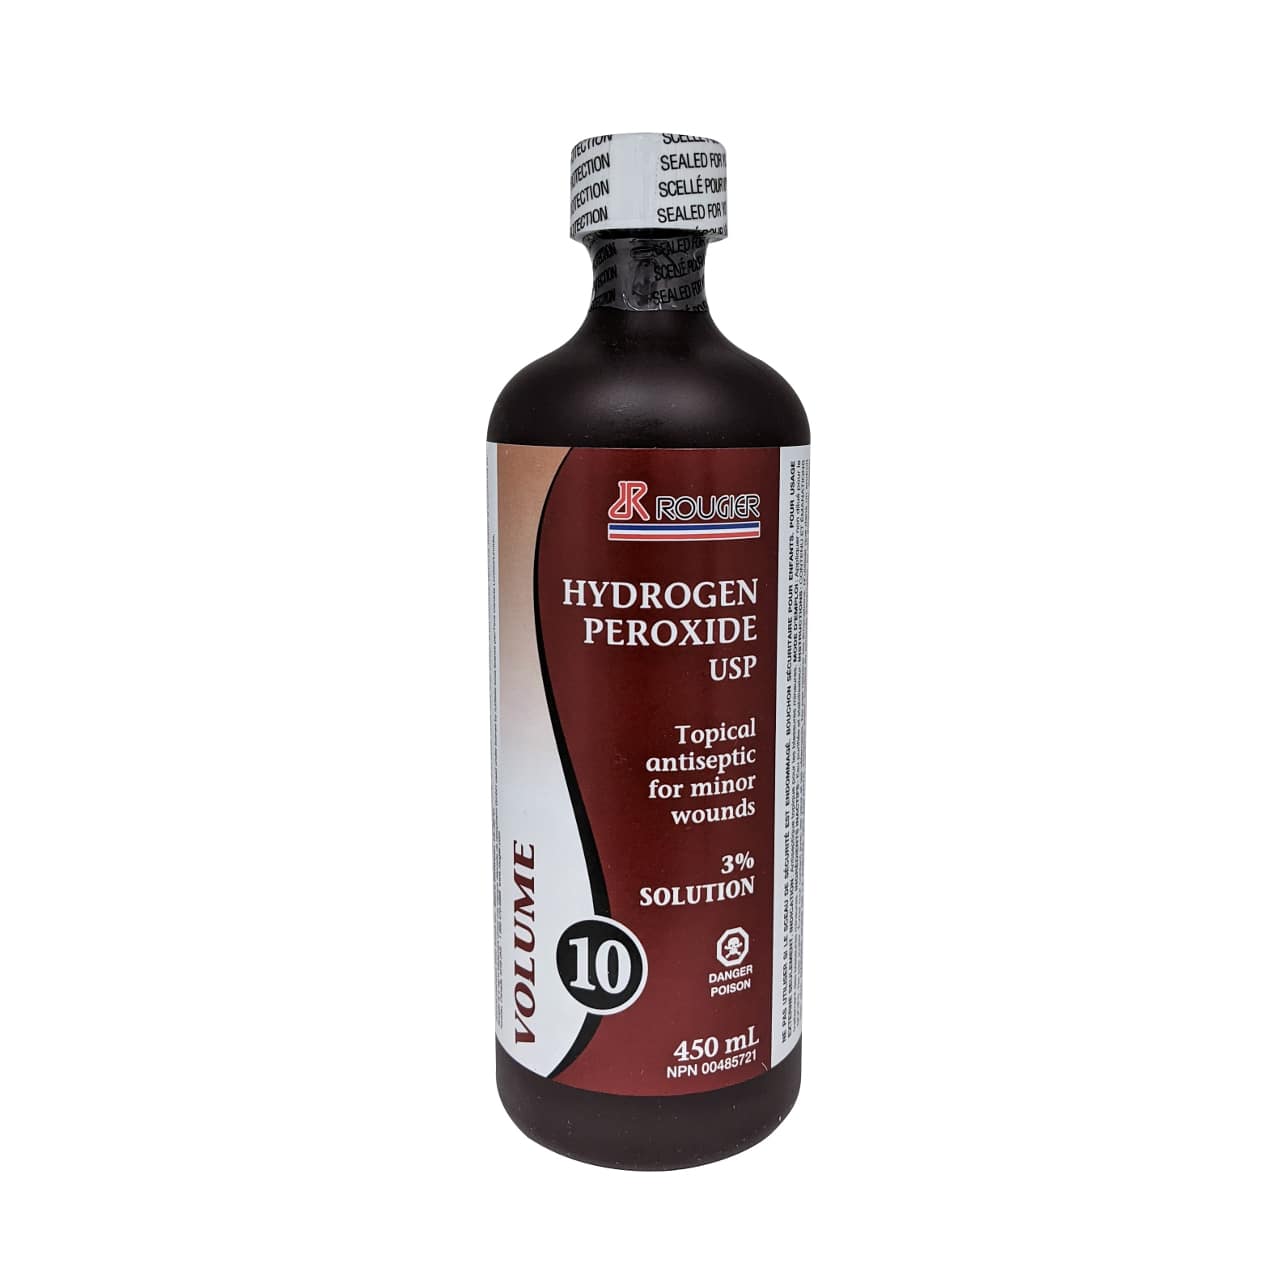 Product label for Rougier Pharma Hydrogen Peroxide USP 3% Solution in English